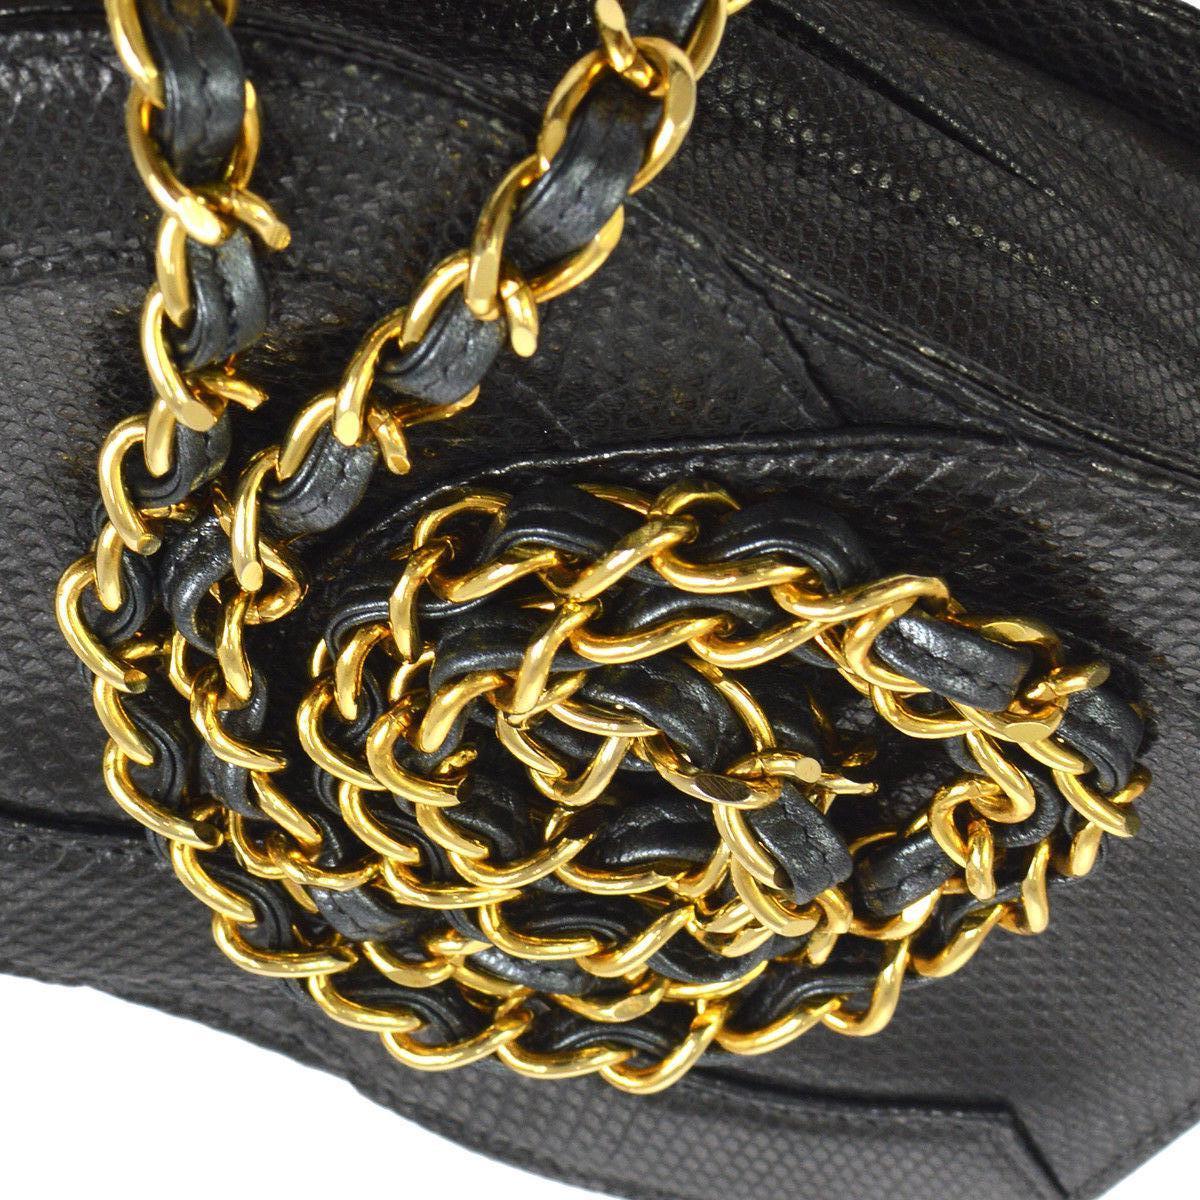 Chanel Rare Lizard Leather Gold Evening Small Party CC Shoulder Flap Bag

Lizard
Leather
Leather lining
Date code present
Gold tone hardware
Measures 6.25